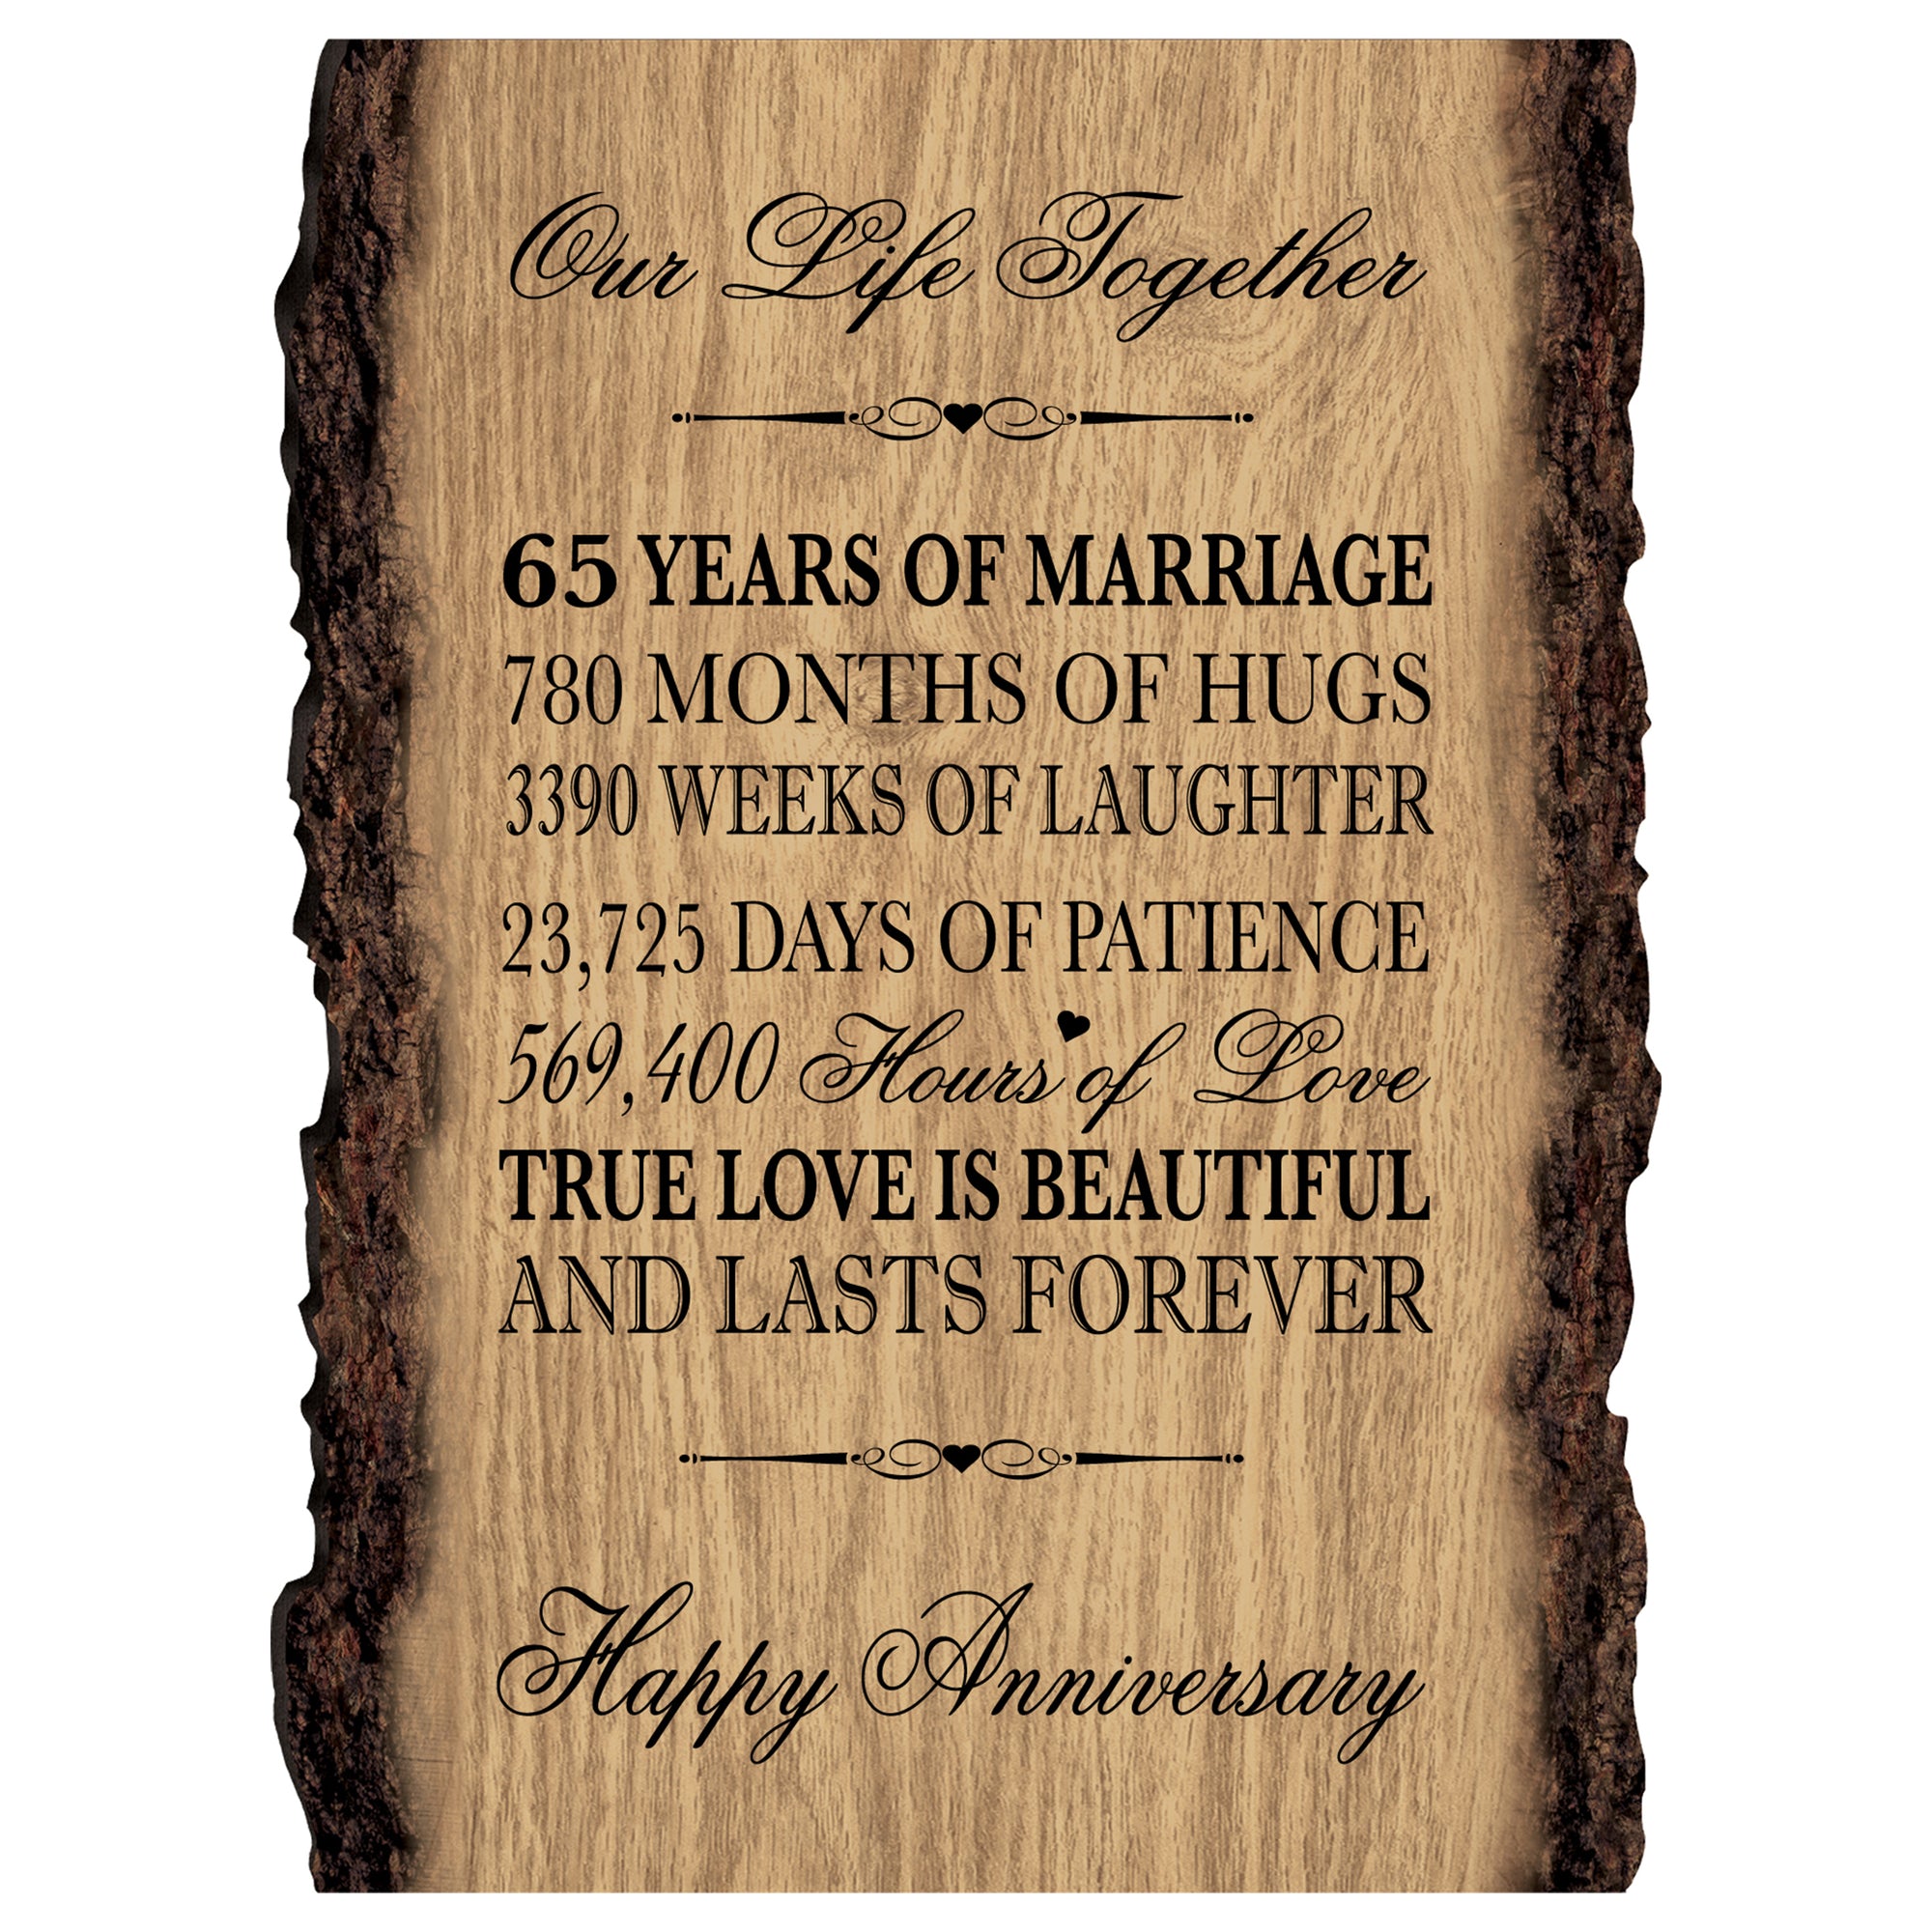 Rustic Wedding Anniversary 9x12 Barky Wall Plaque Gift For Parents, Grandparents New Couple - 65 Years Of Marriage